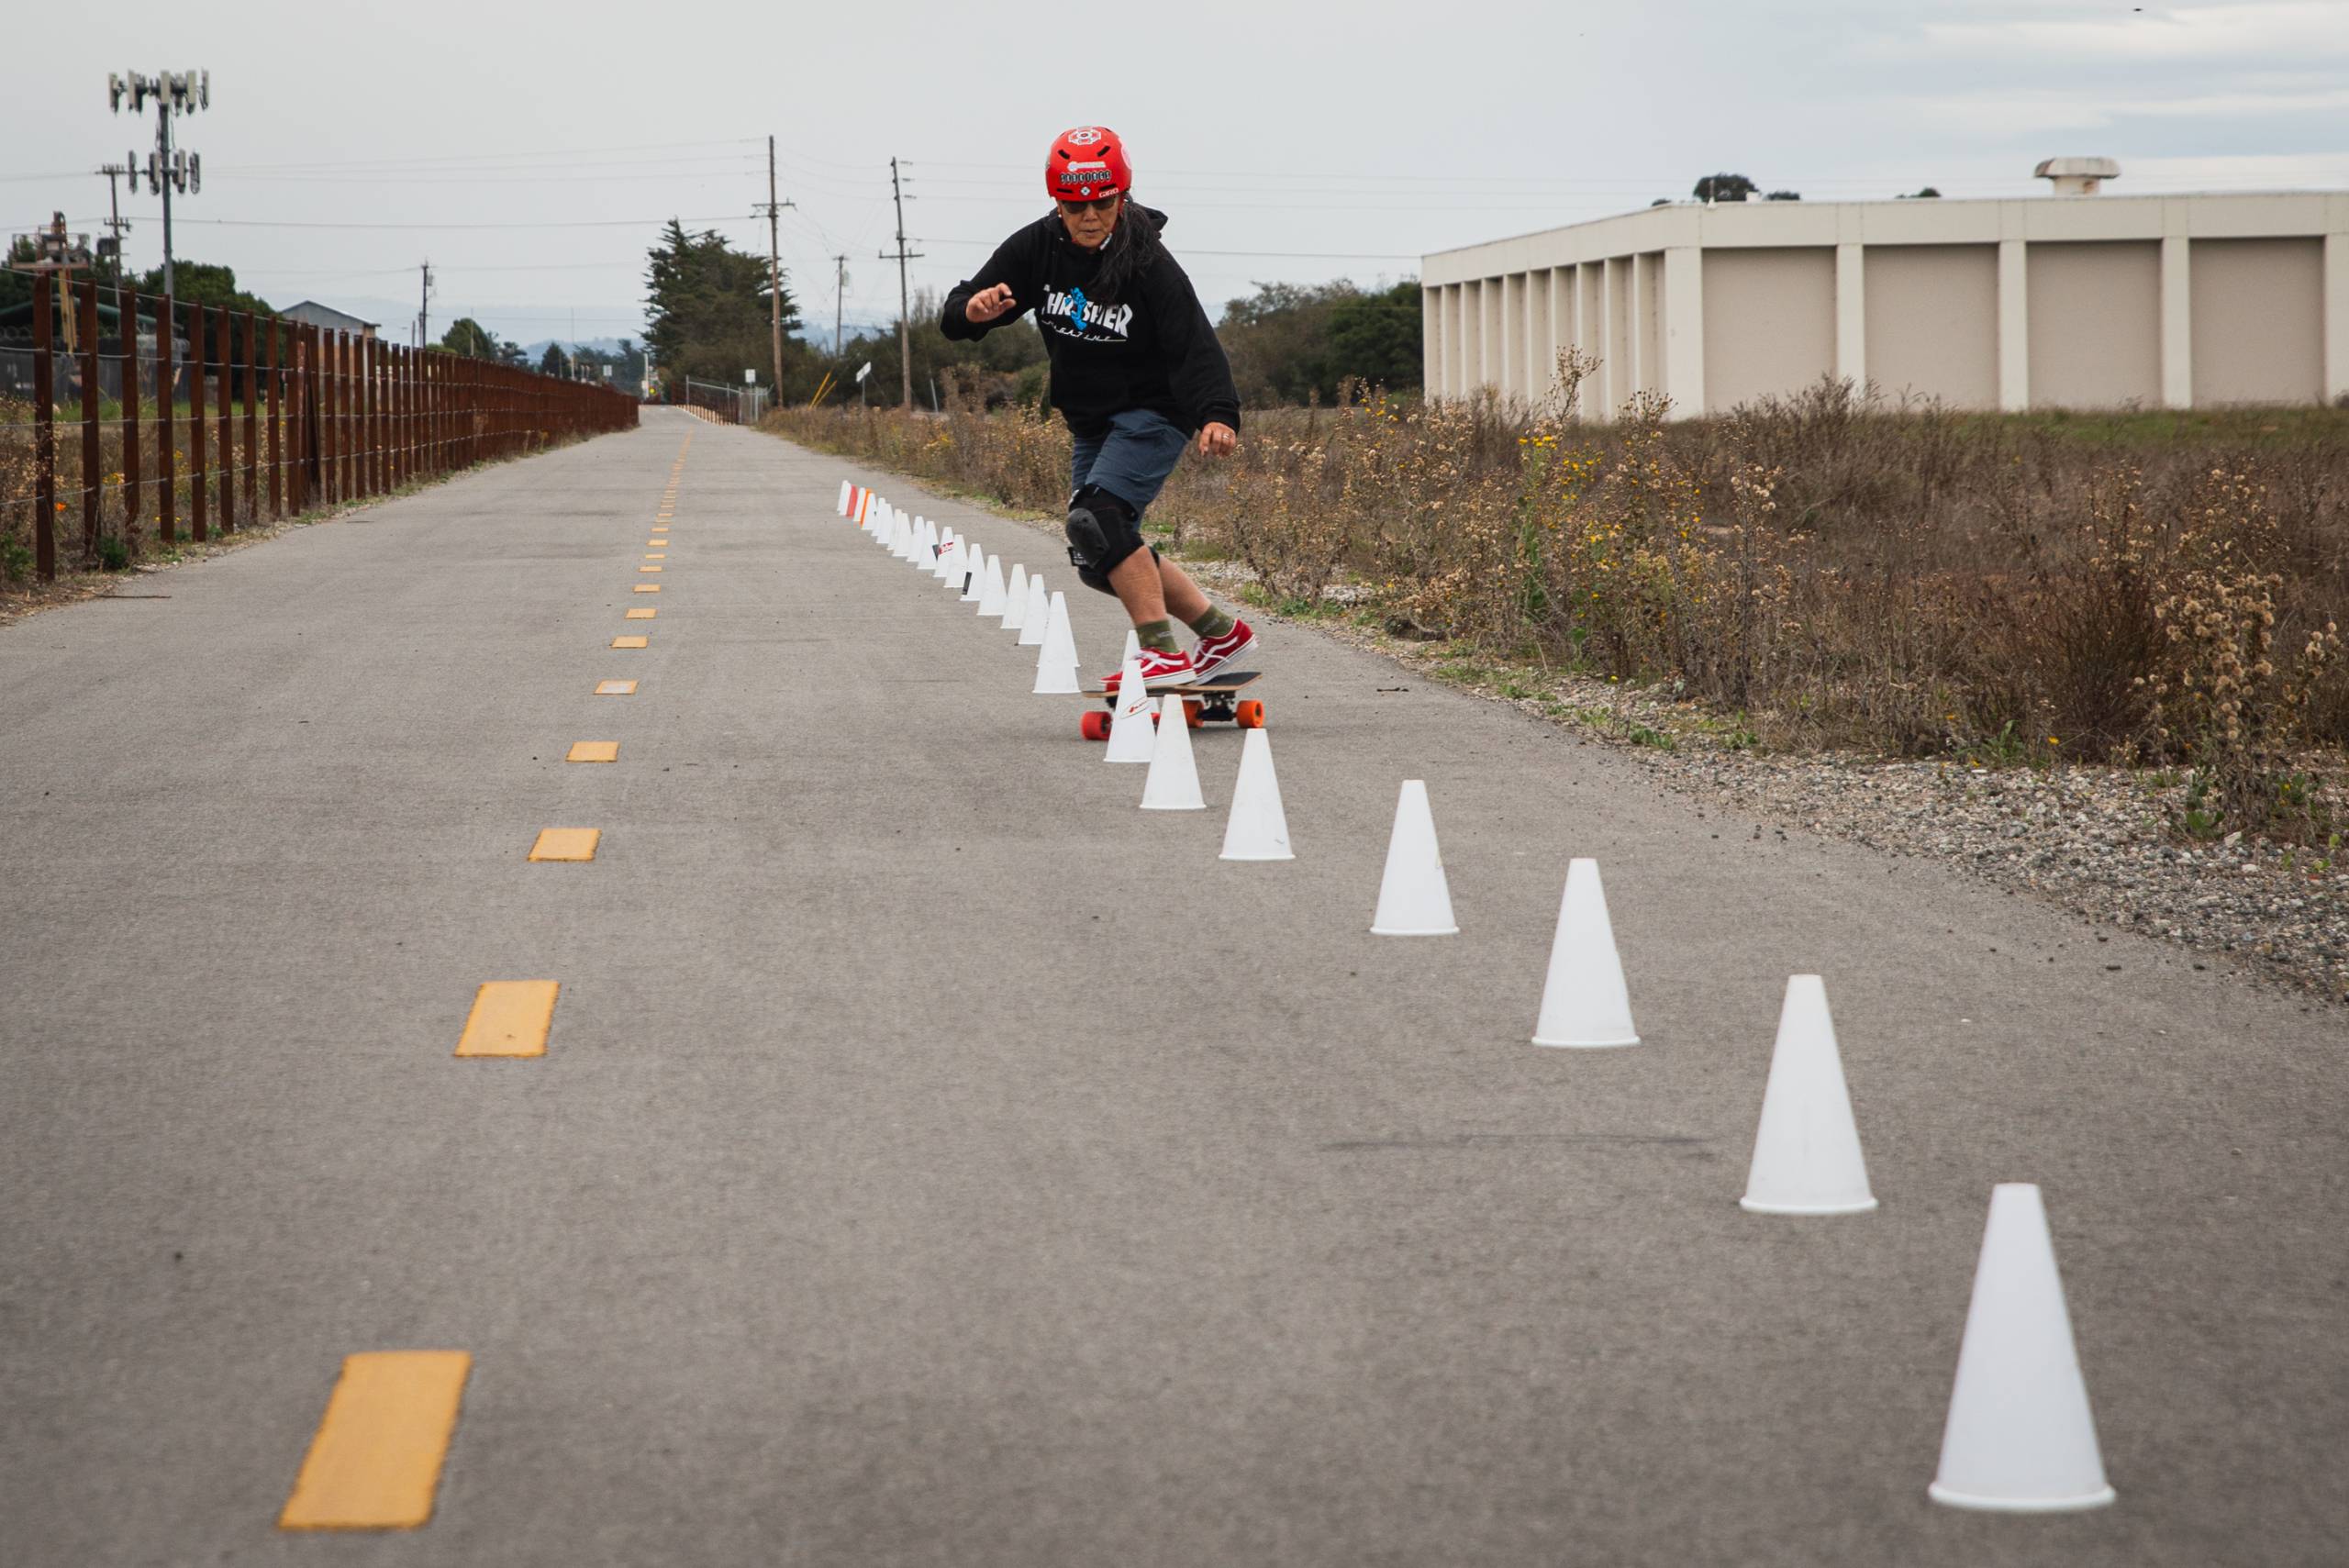 A skateboarder with a red helmet slaloms through a line of white cones on a road.